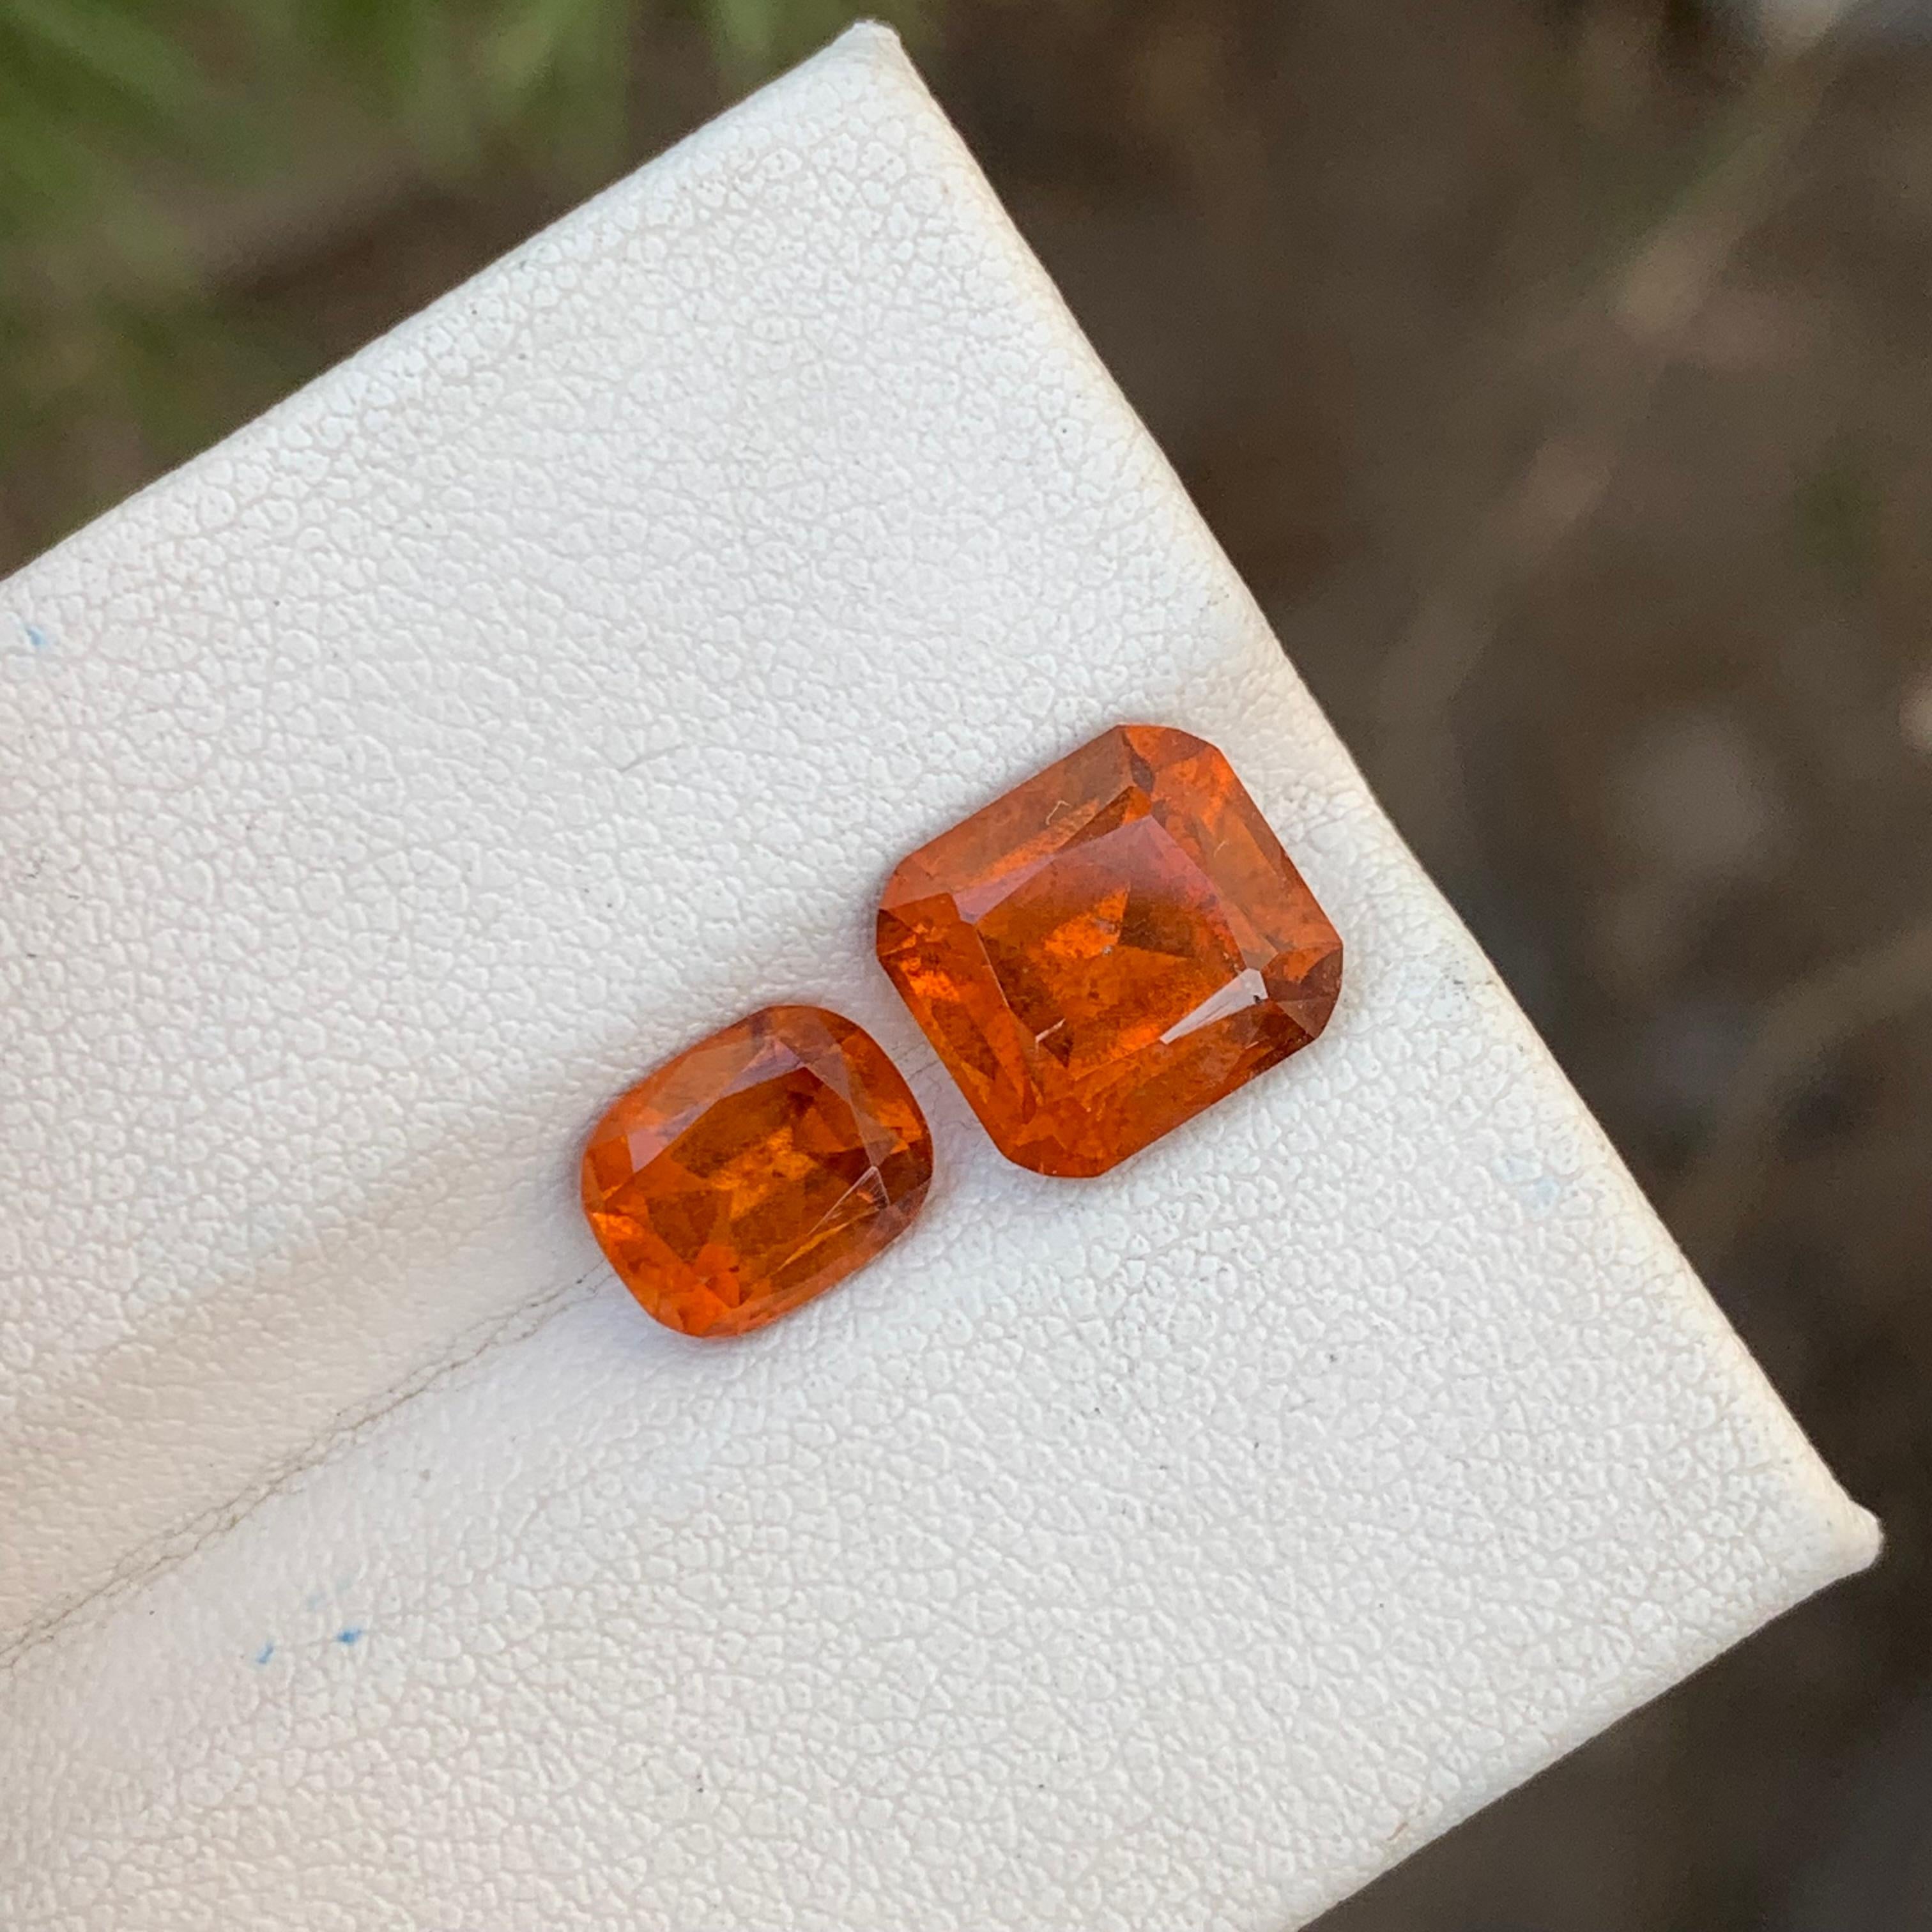 5.95 Carats Natural Loose Hessonite Garnet 2 Pieces For Ring Jewelry Making  en vente 14